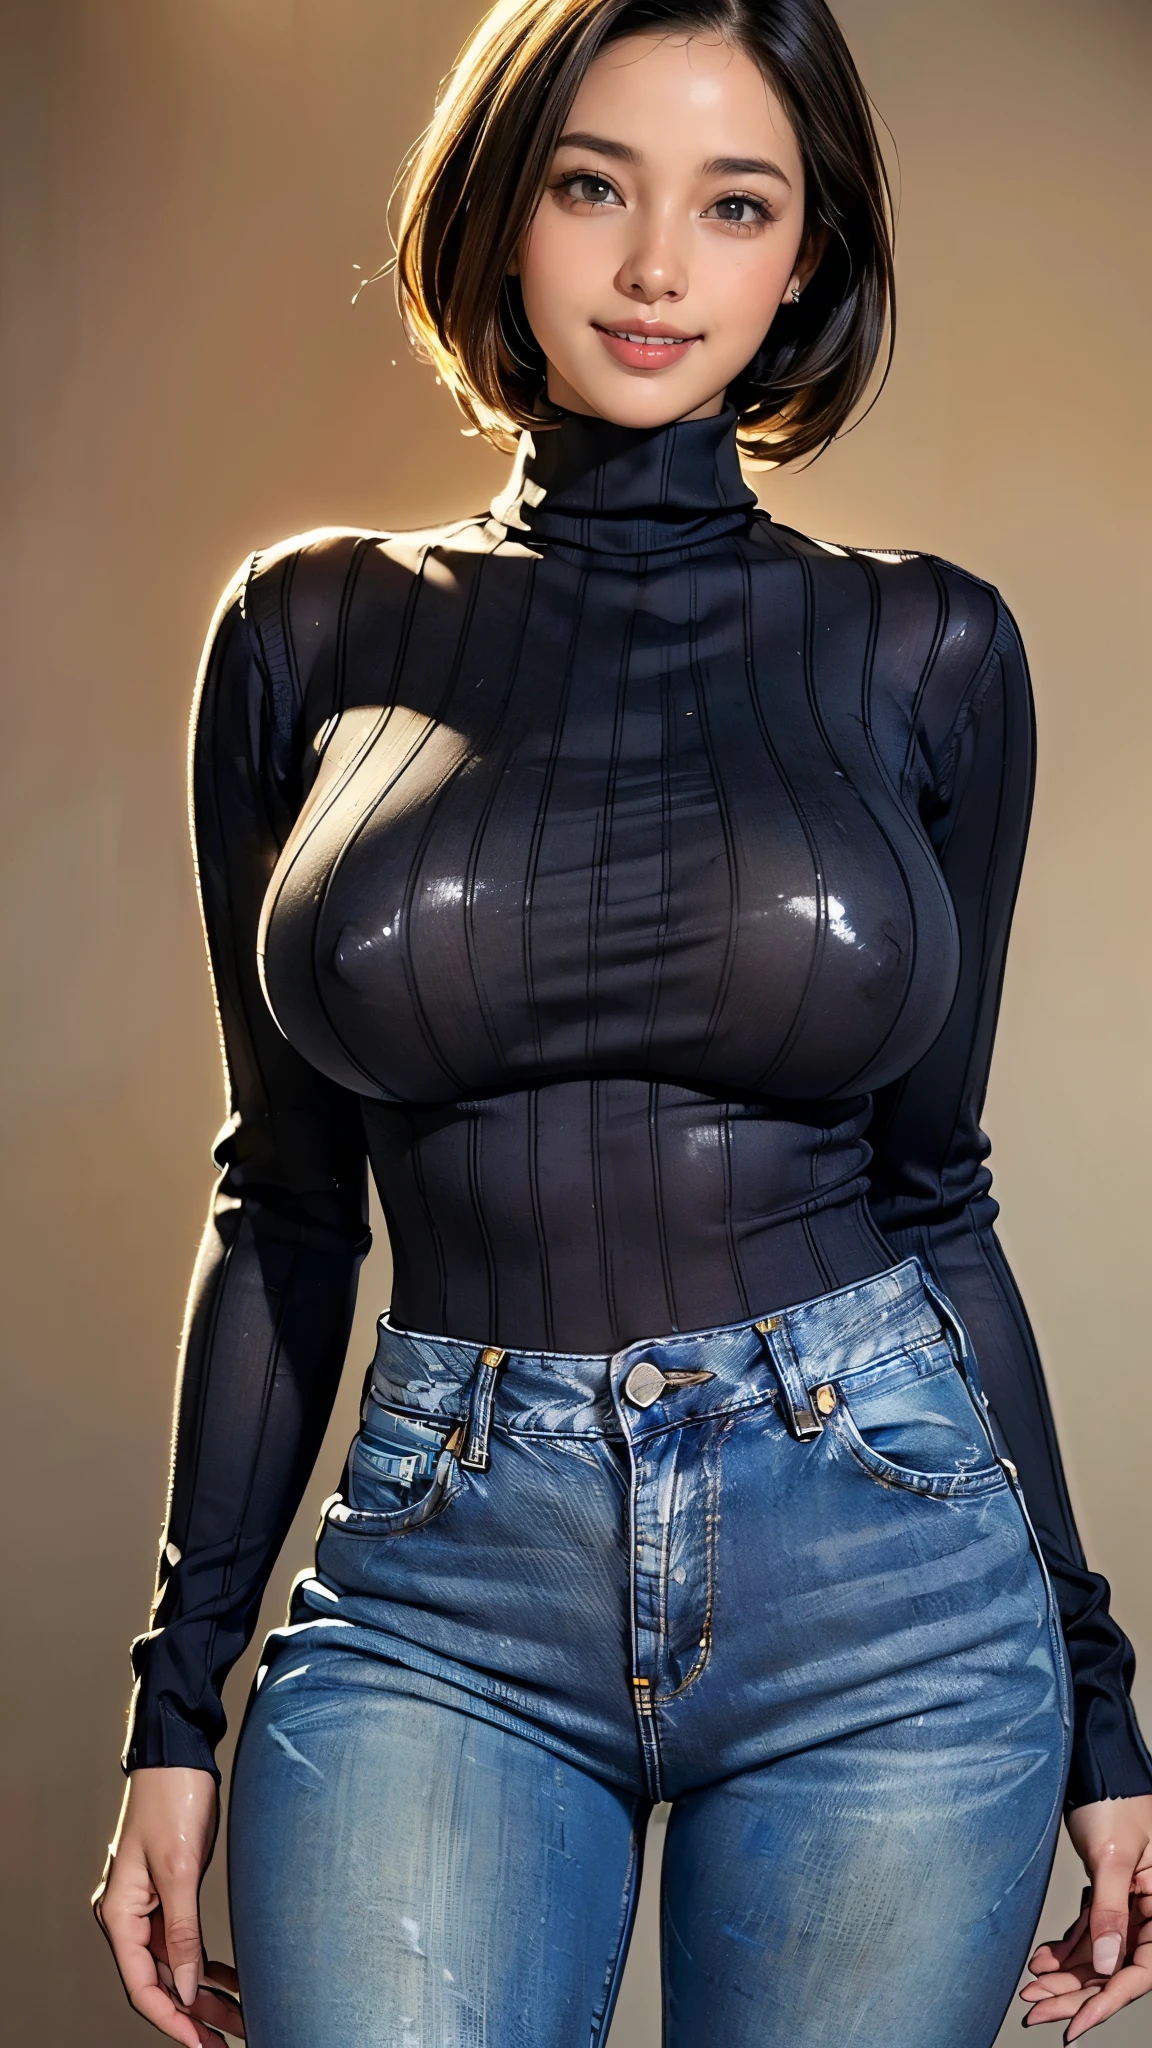 (1 girl:1.5),(50 years old:1.5),(Detailed body:1.4),(Beautiful Skin:1.4),(Japanese:1.5),((Turtleneck sweater that fits the body:1.5)),(Nipple protrusion:1.2),((Wearing jeans:1.5)),(front:1.5),BREAK(Looking at me:1.5),((Fine skin:1.4)),(Shiny skin:1.5),(Beautiful Face:1.5),(Detailed hand drawing:1.3),(Beautiful female hands:1.3),(smile:1.5),(short hair),BREAK(Big Breasts:1.5),(Blurred Background:1.5),(Very sensual:1.5),(sexy:1.5),((Thick thighs:1.5)),(Beautiful body:1.5),((Very sensual:1.5)),BREAK(((masterpiece:1.5),(highest quality:1.5),(Very detailed:1.5),(High resolution:1.5),(Realistic:1.5),(Realistic:1.5),(Delicate depiction),(Careful depiction))),8k,wallpaper